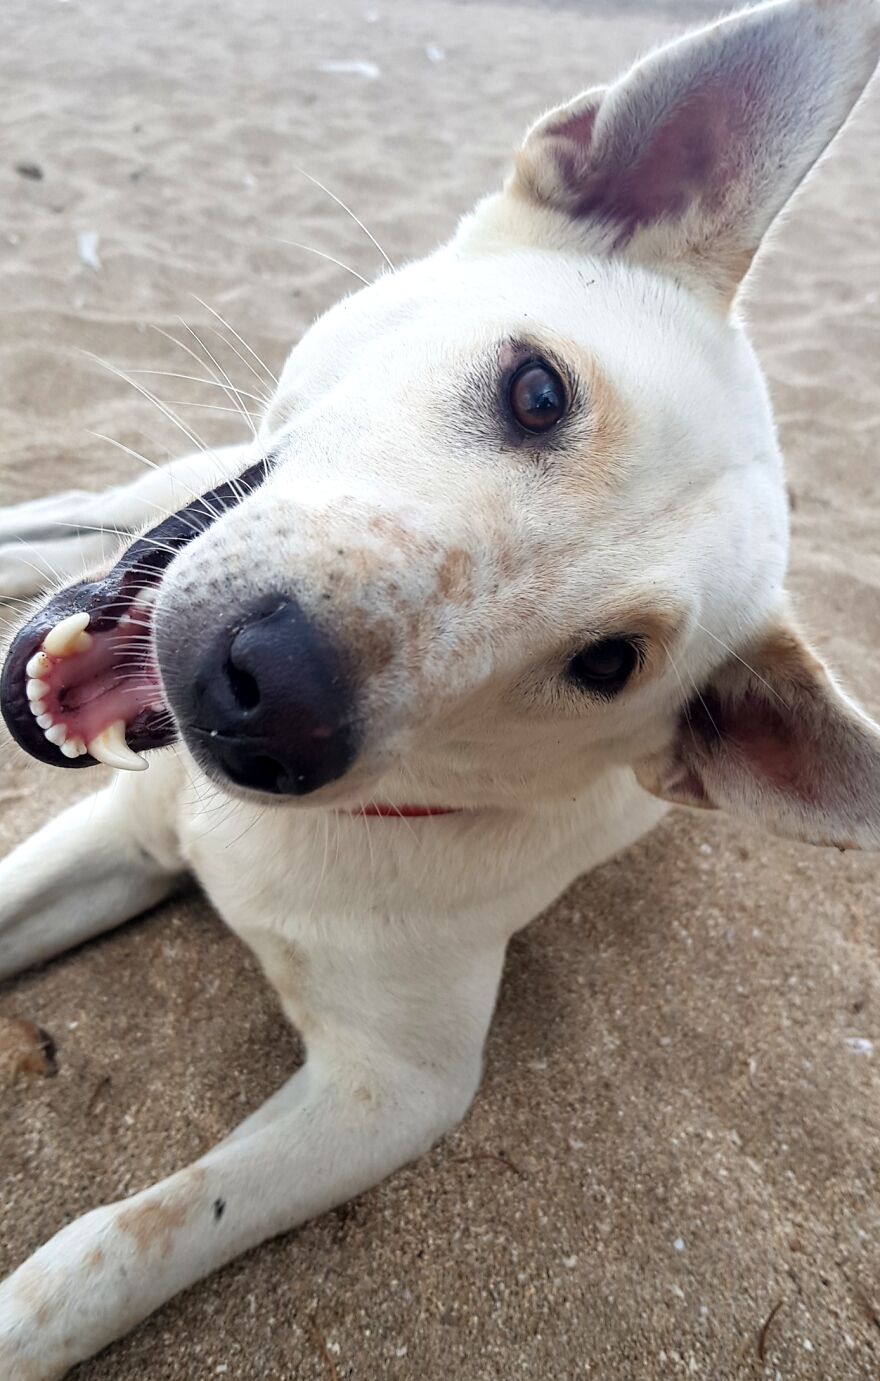 I Photograph Stray Dogs That We Befriend With In Bali Beaches (20 Pictures)